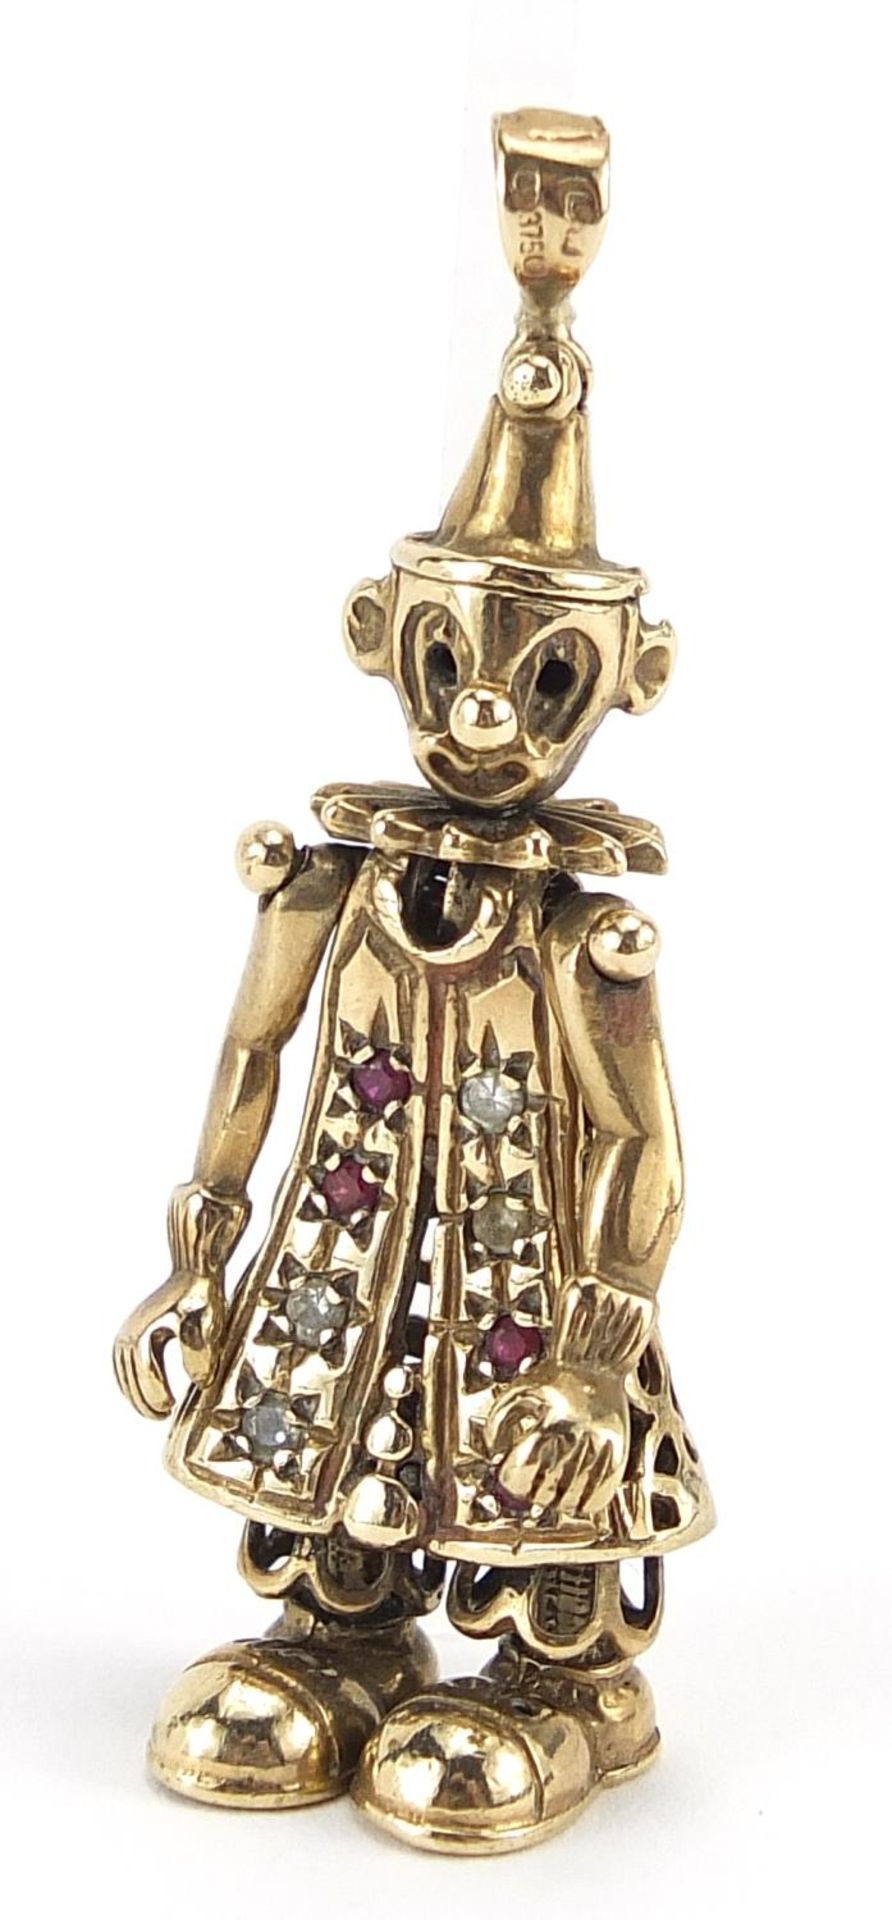 9ct gold articulated clown pendant set with pink and clear stones, 4.5cm high, 6.0g